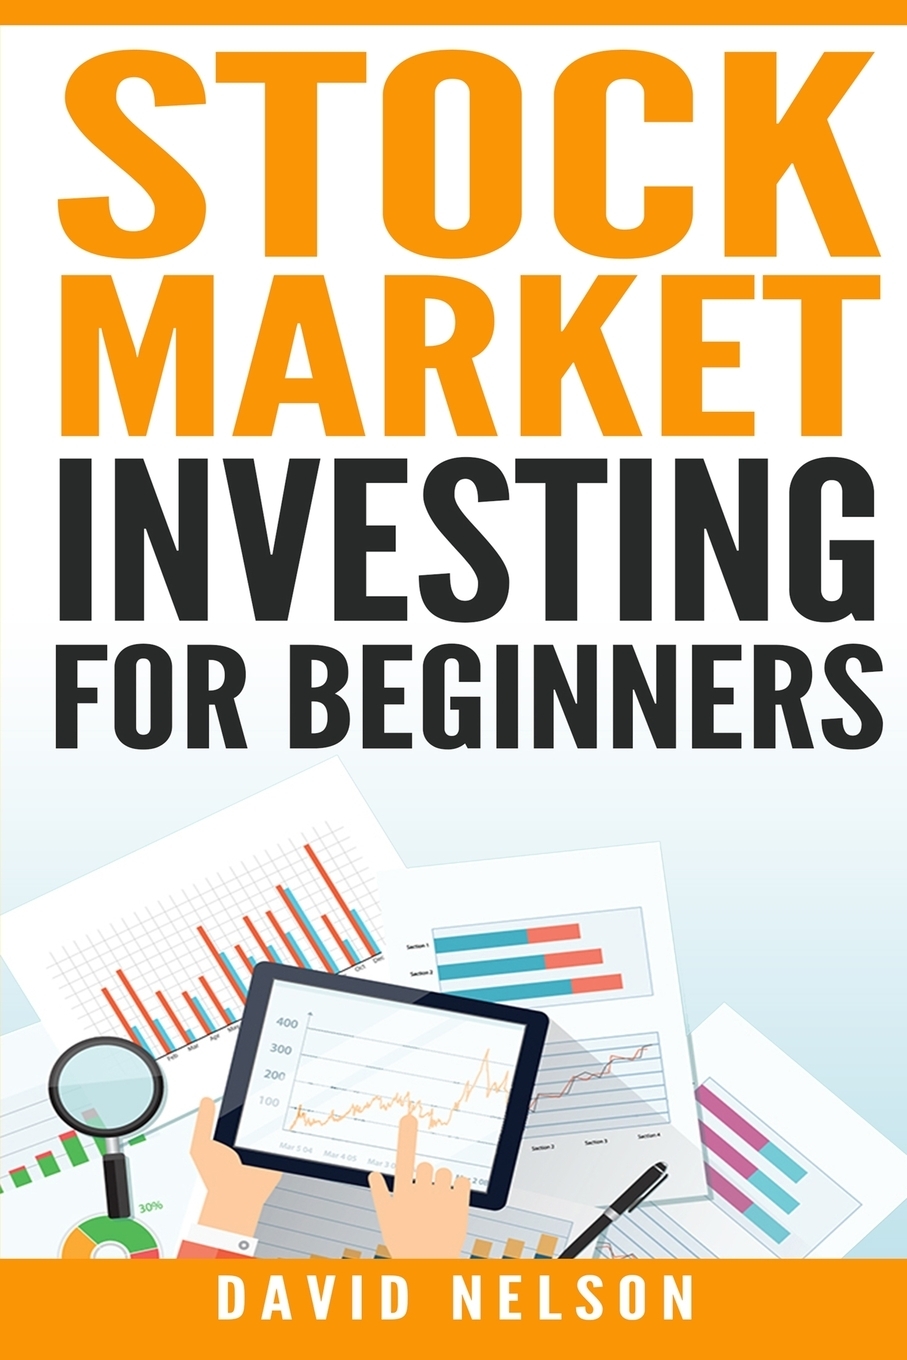 stock books for investing